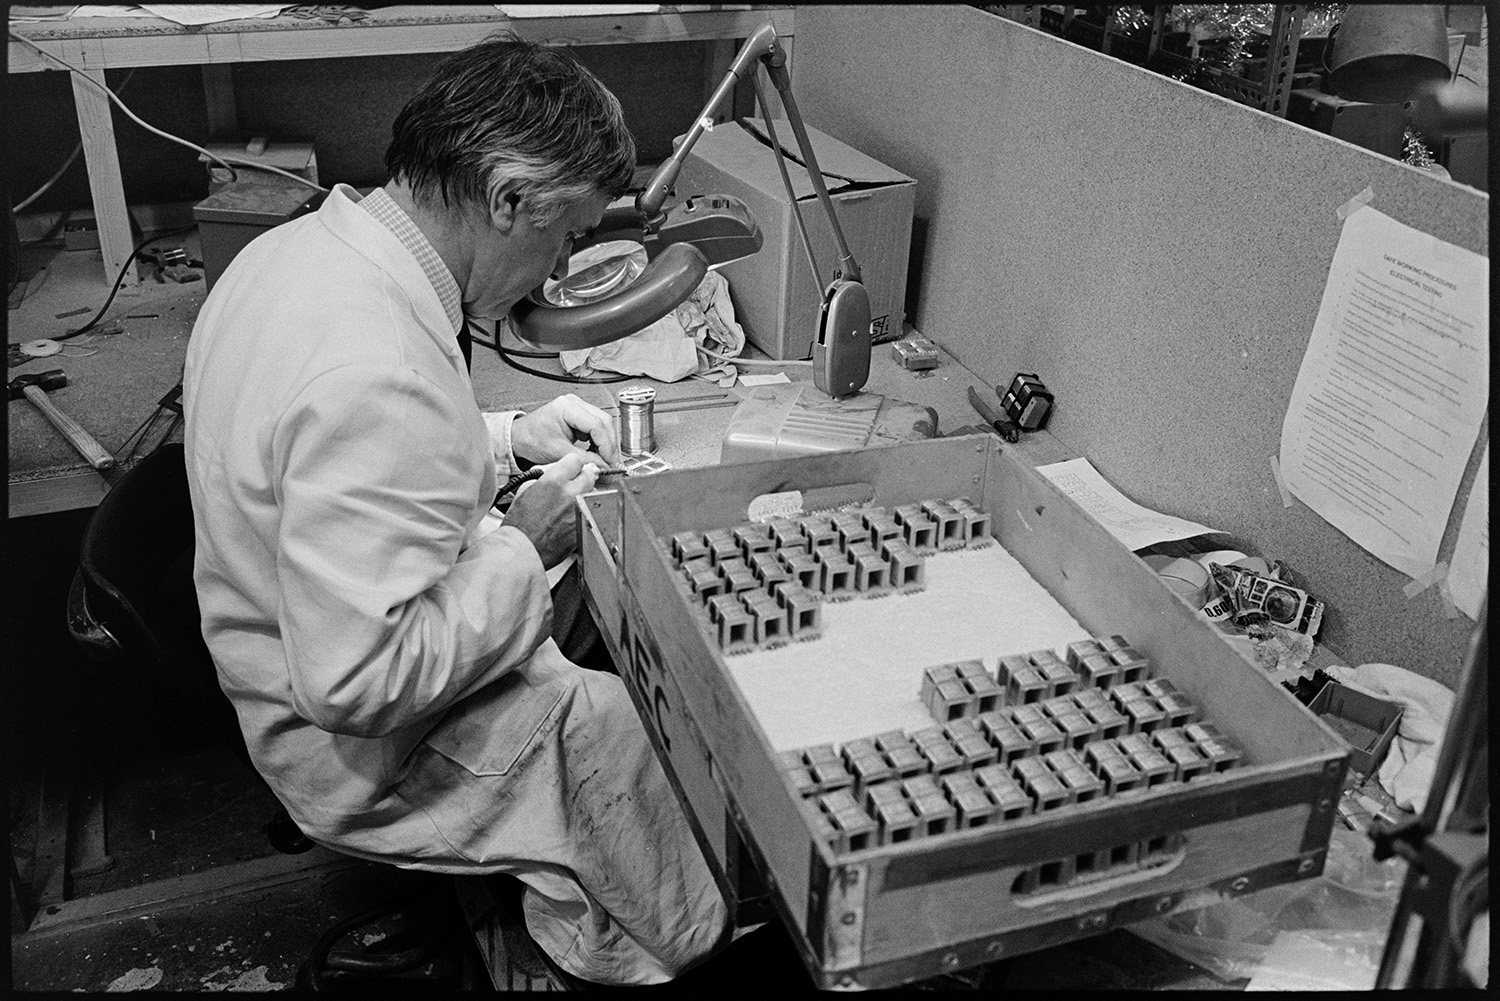 Inside transformer factory men testing, making, designing transformers, computer. 
[A man working with transformers at Apex Transformers at Pathfields Business Park in South Molton. He is using a magnifying glass.]